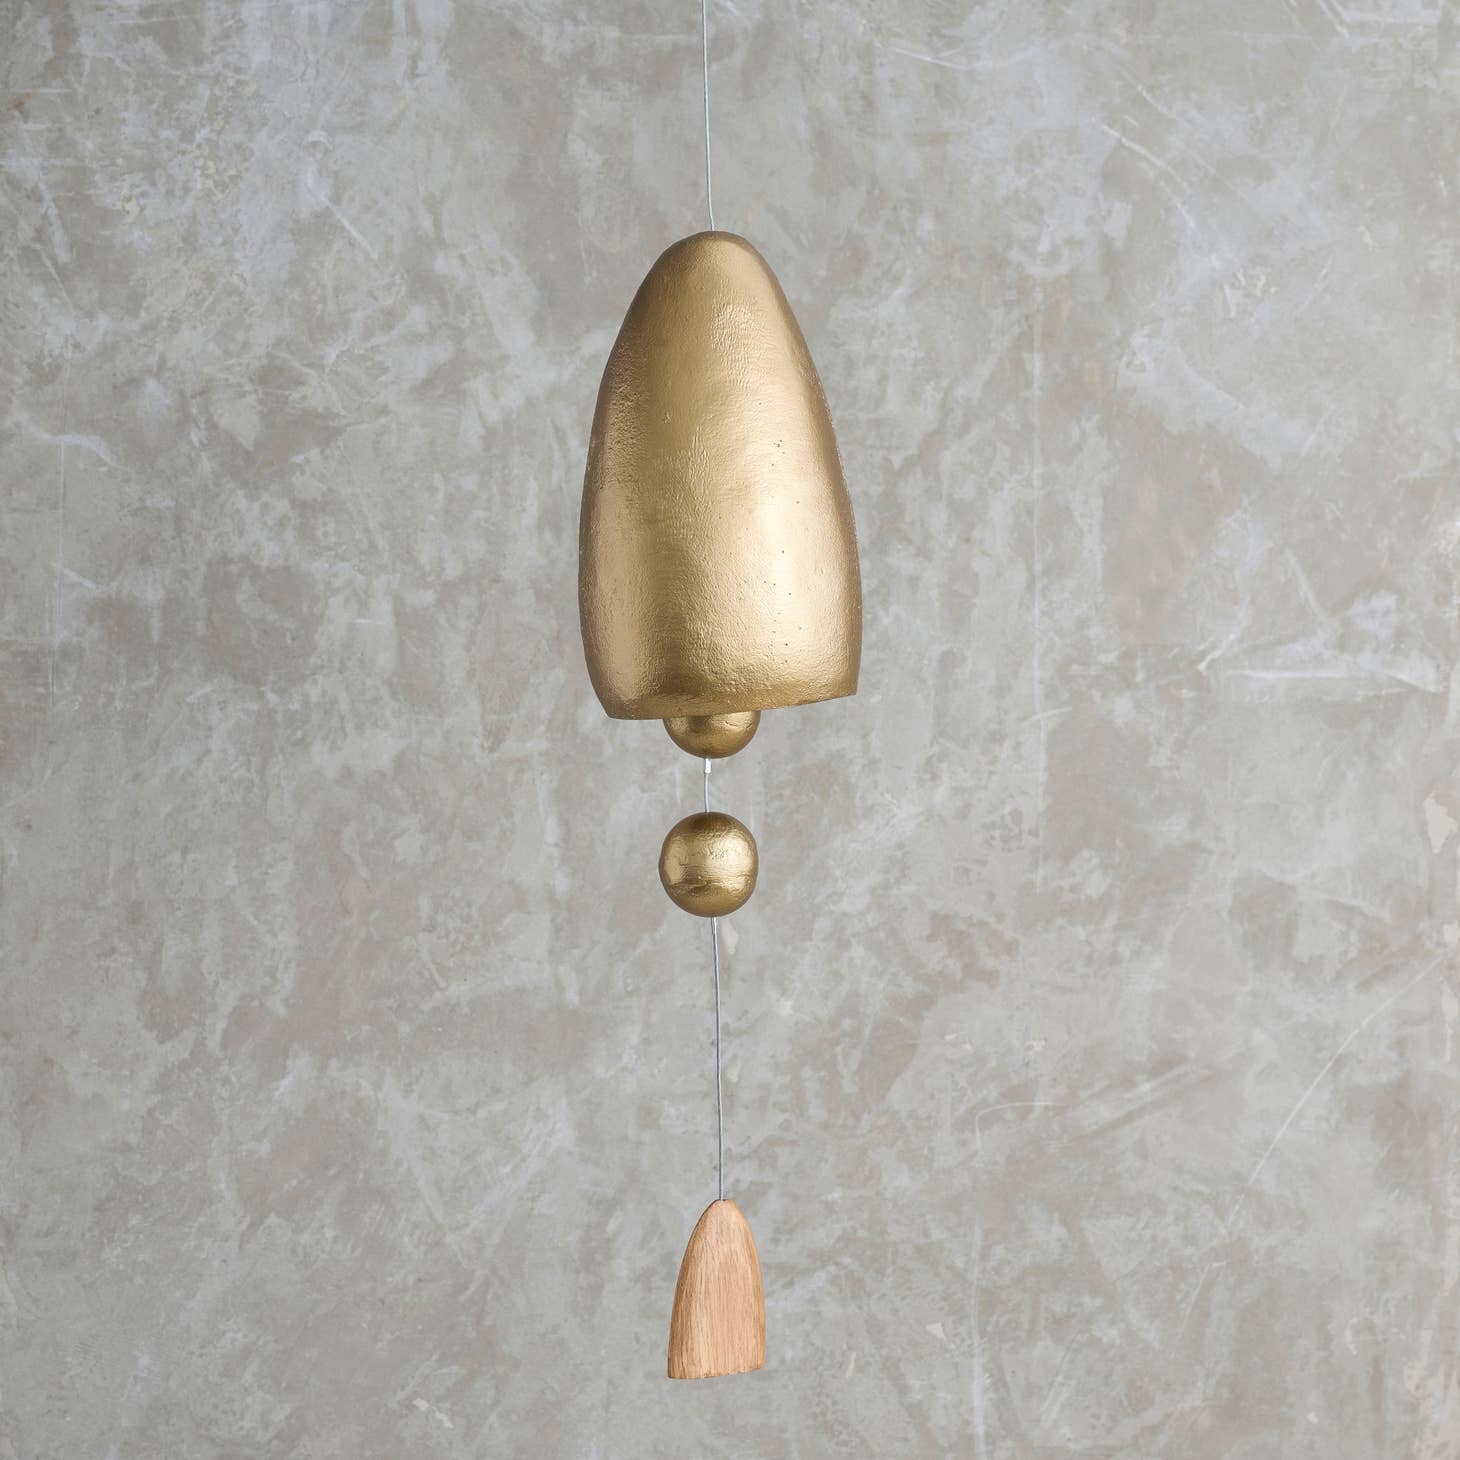 This tall, cone-shaped bell is sand-cast in aluminum and given an antique brass finish, then outfitted with a pair of hollow metal spheres and a dome-shaped, polished oak sail on its center cord. Ethically made in India.